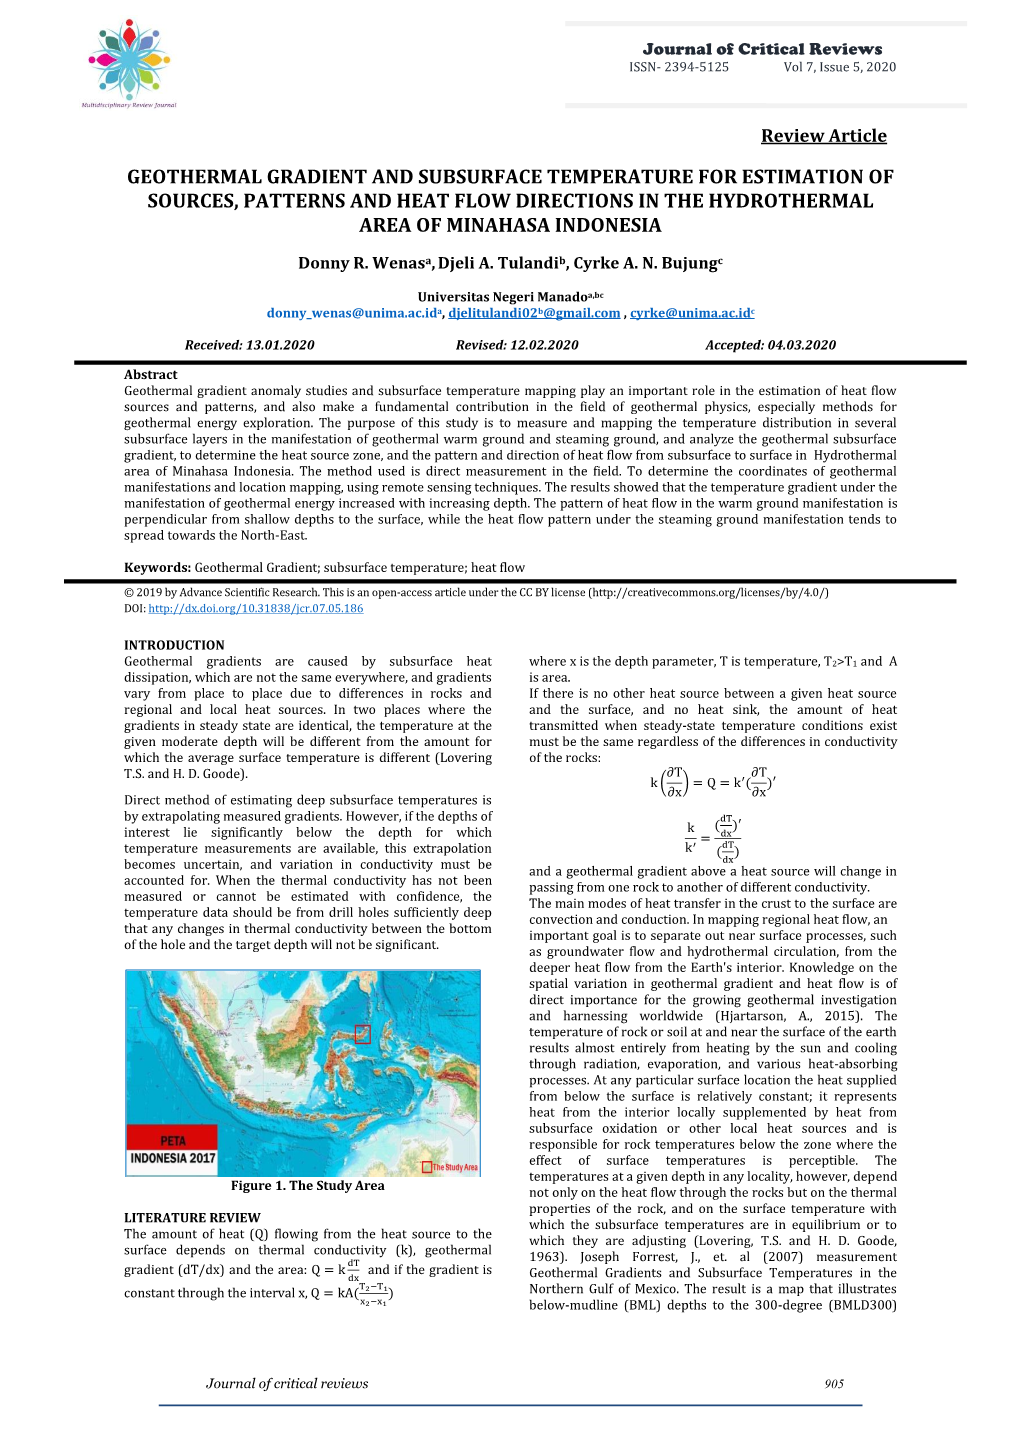 Geothermal Gradient and Subsurface Temperature for Estimation of Sources, Patterns and Heat Flow Directions in the Hydrothermal Area of Minahasa Indonesia